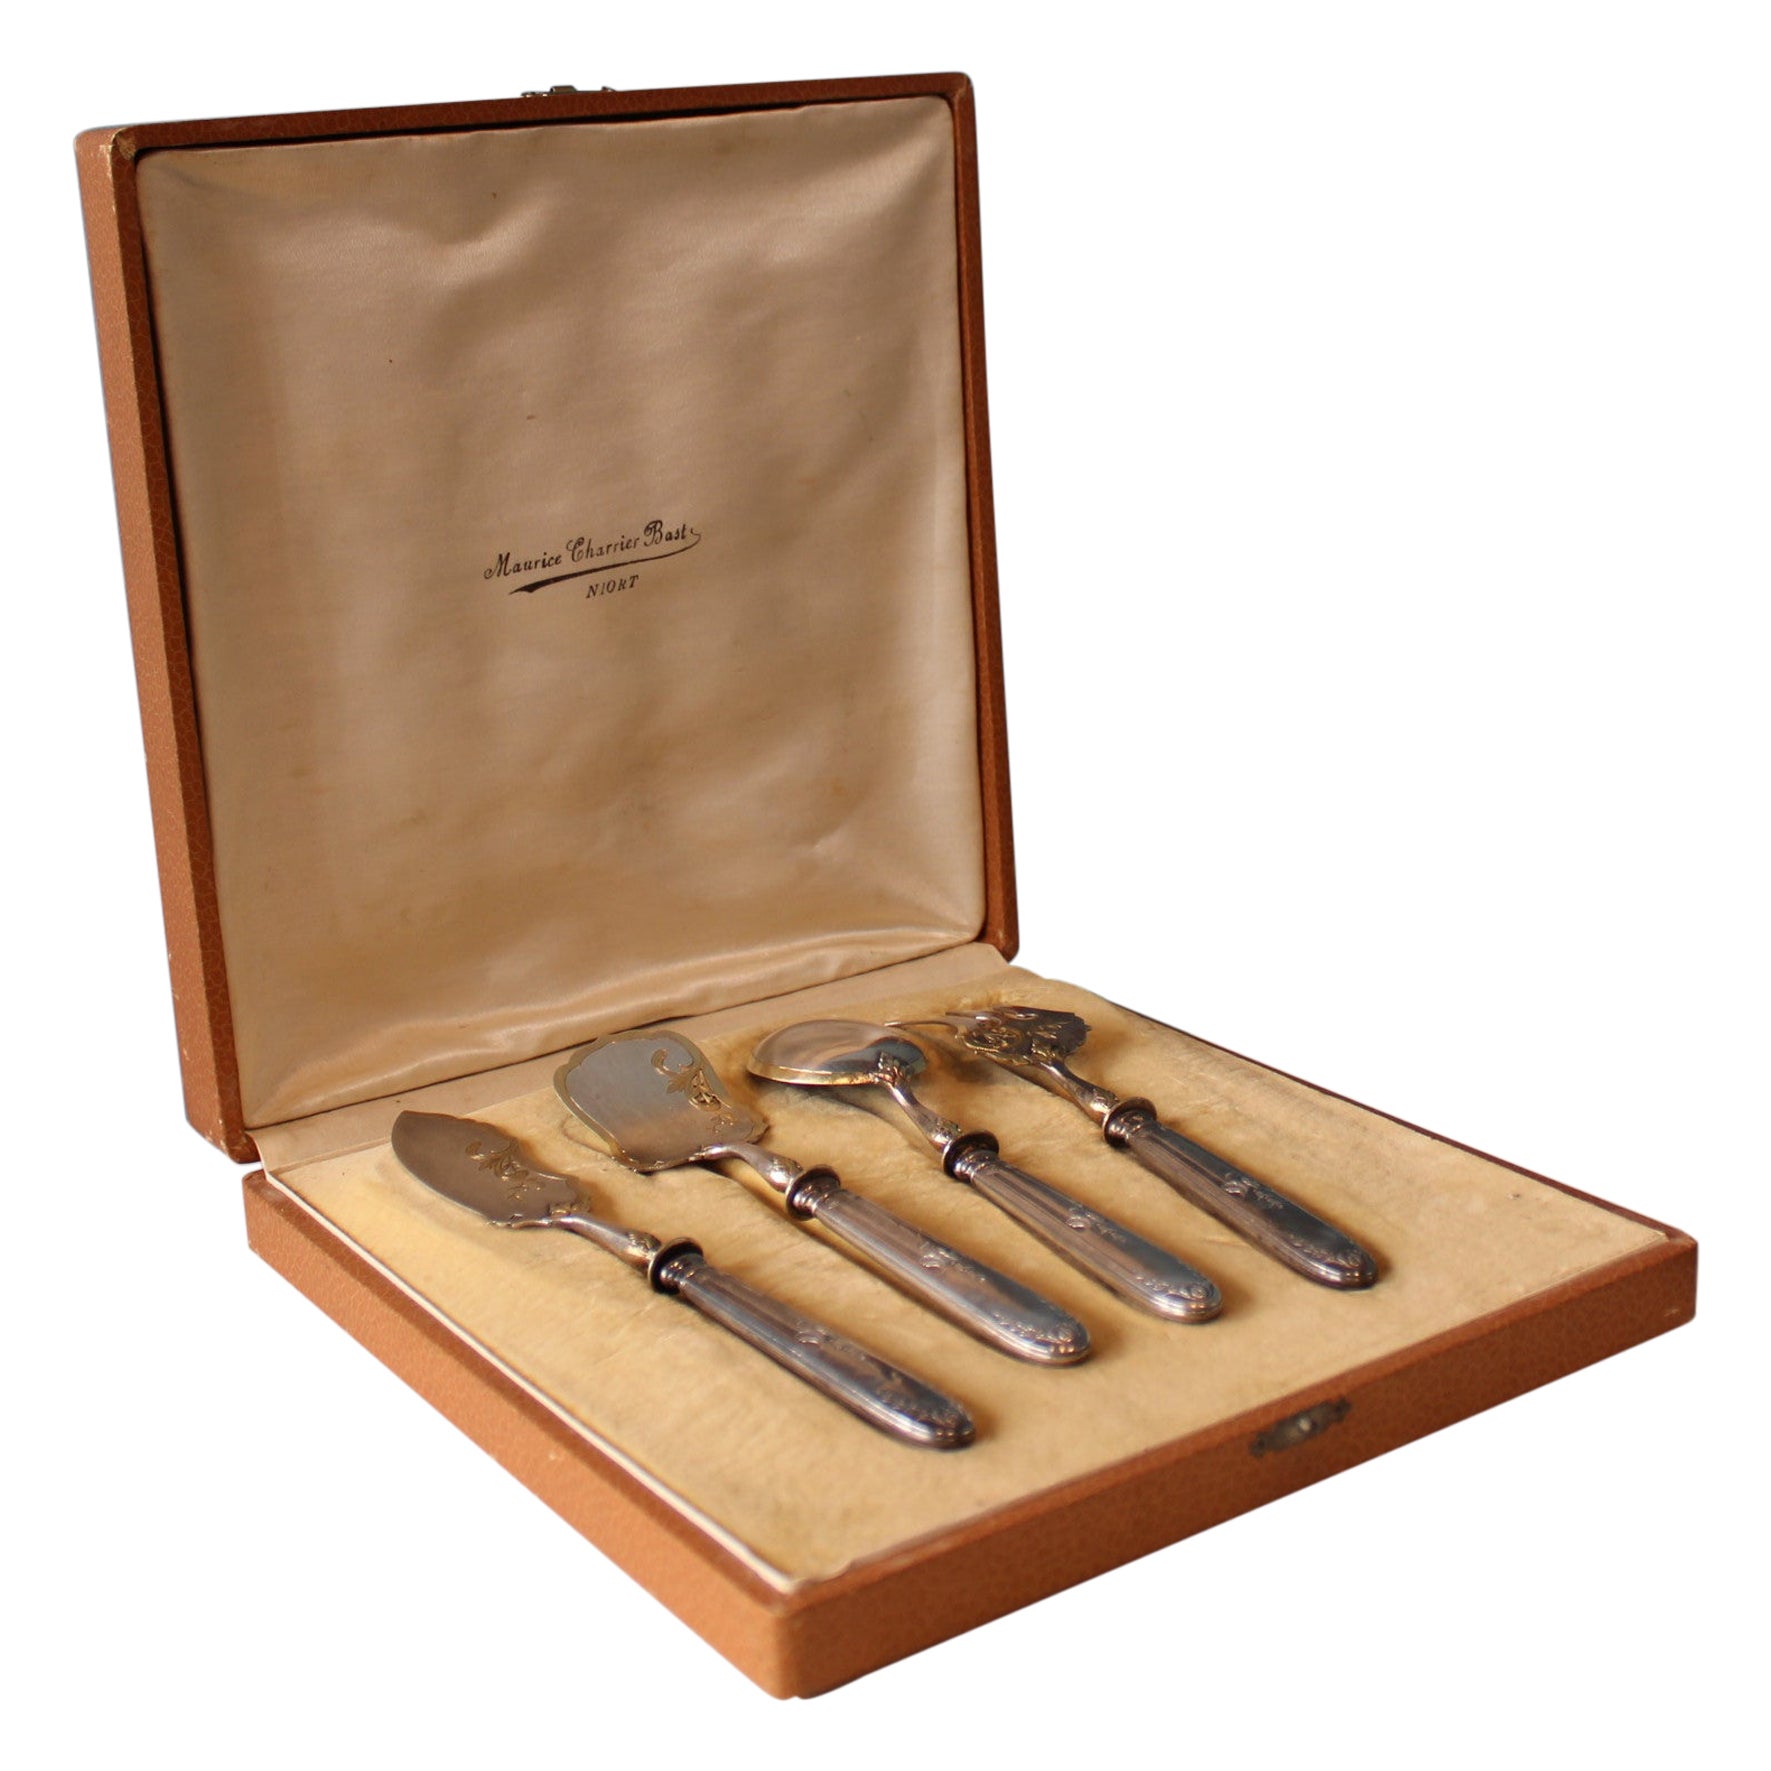 Silver and gold metal serving cutlery in their box For Sale